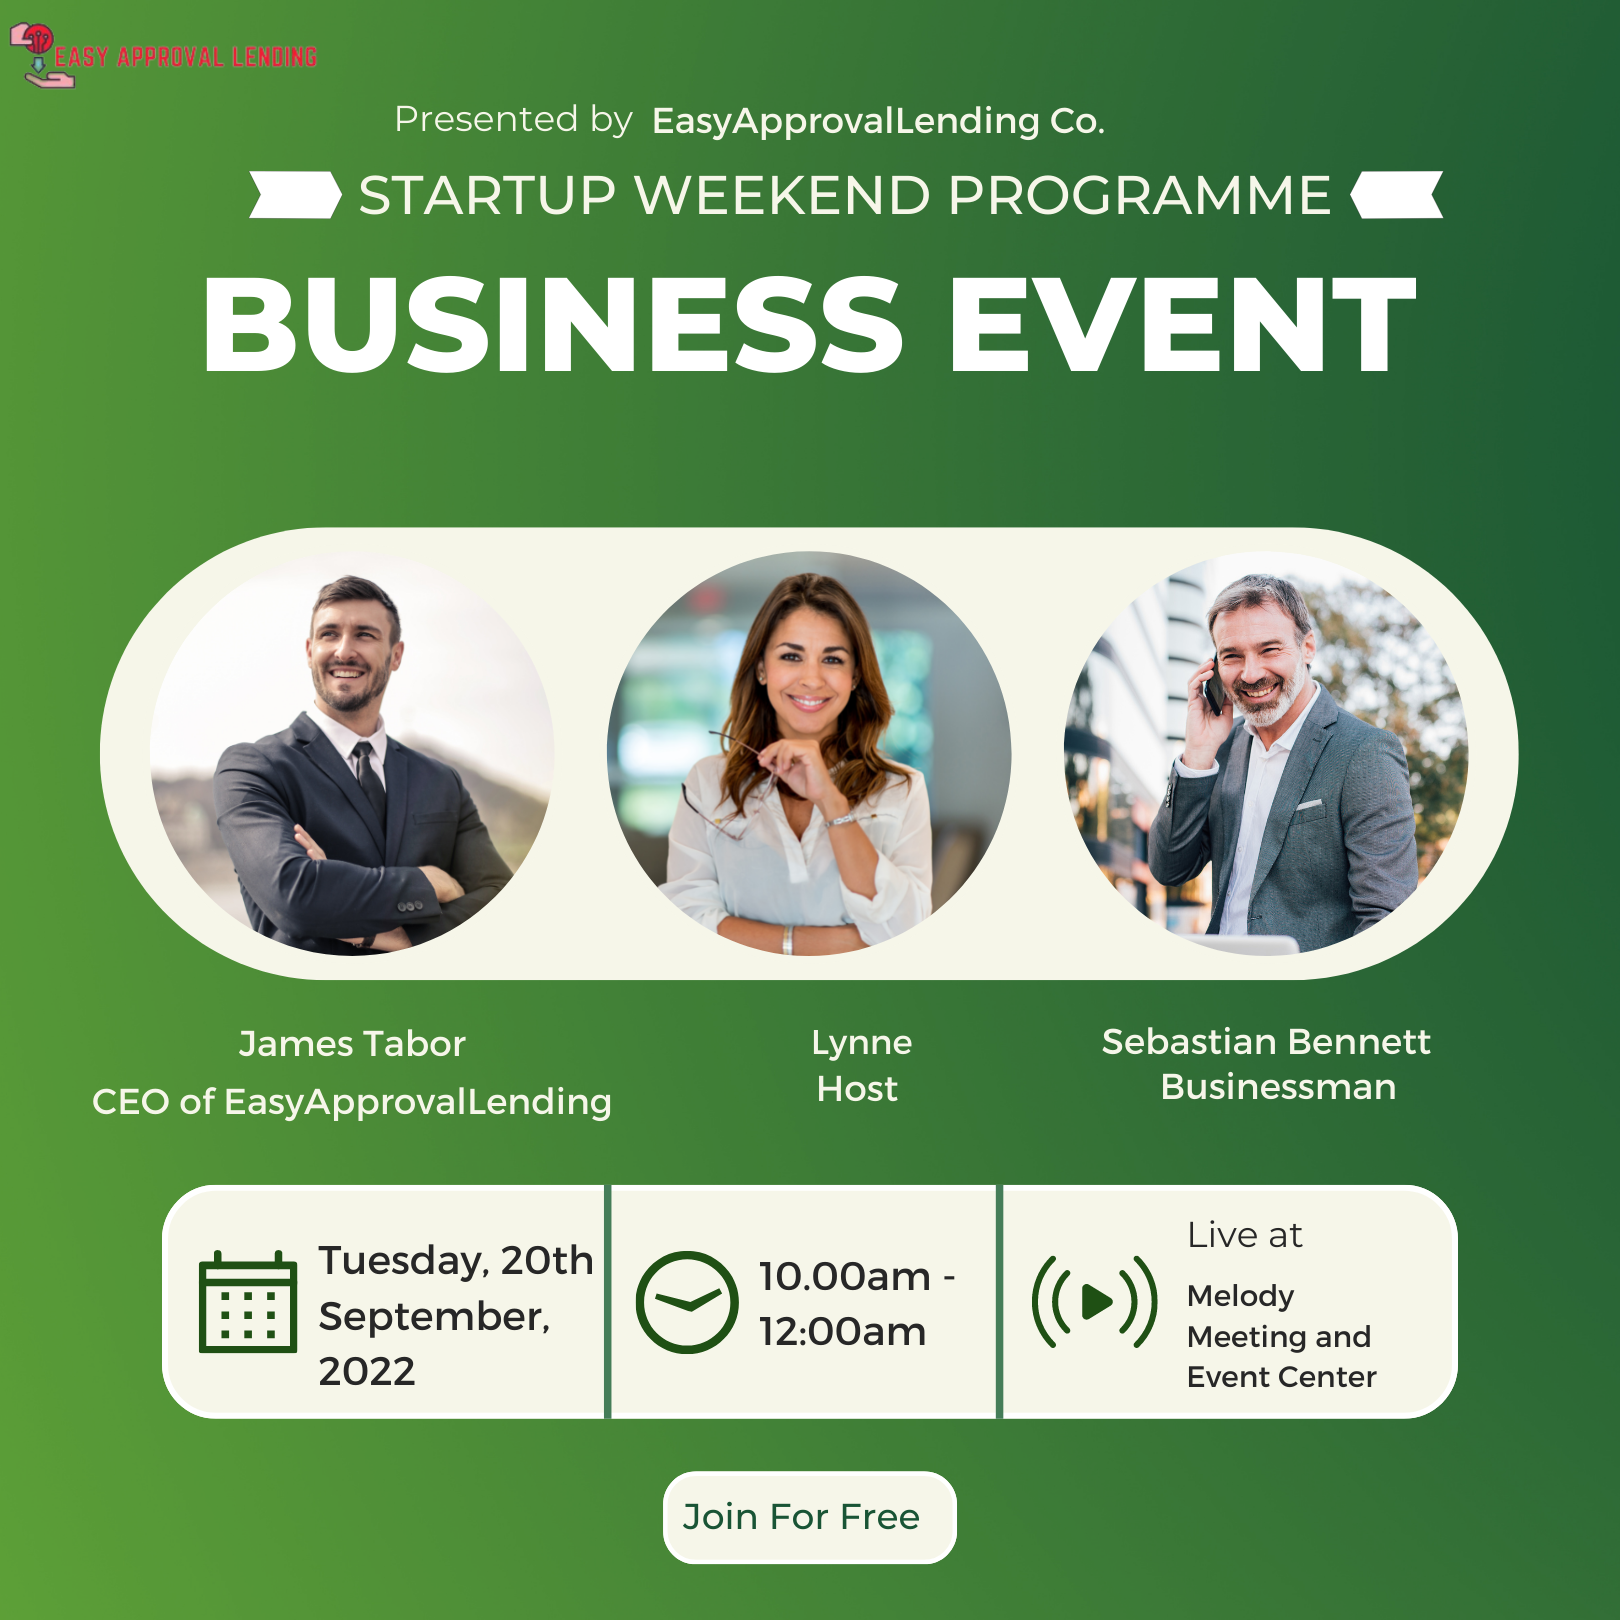 EasyApprovalLending Company Launches "Startup Weekend Programme"